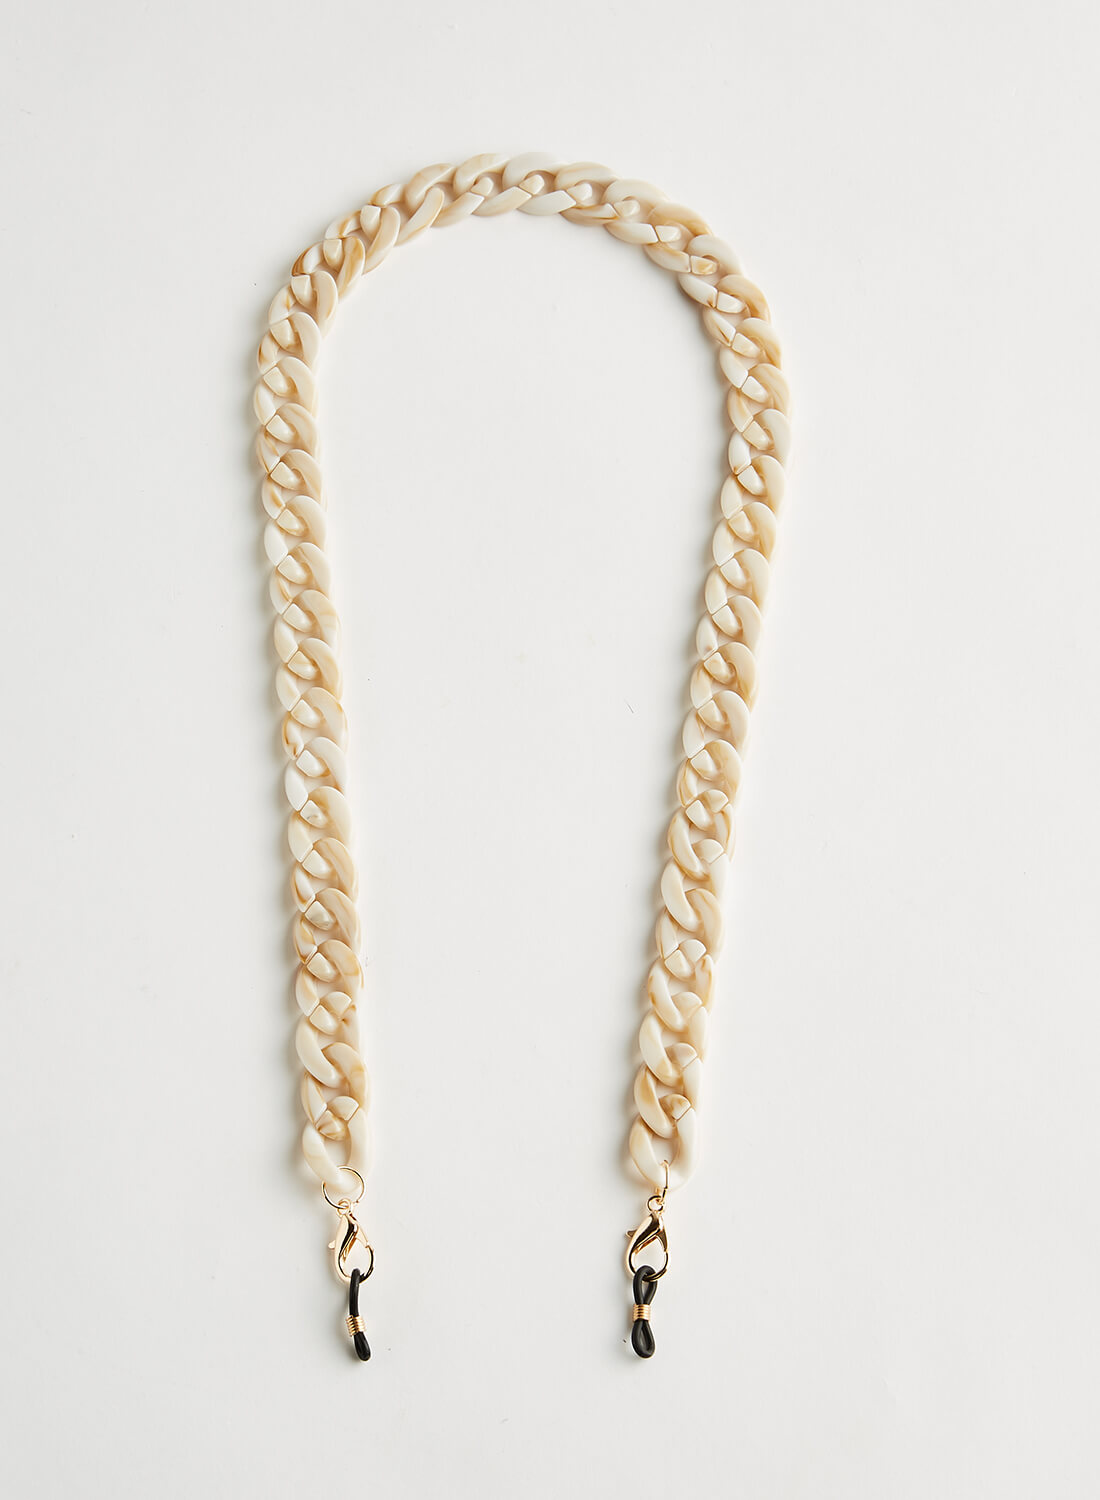 FRAME CHAIN Time for Change Sunglasses Chain Strap | Neiman Marcus